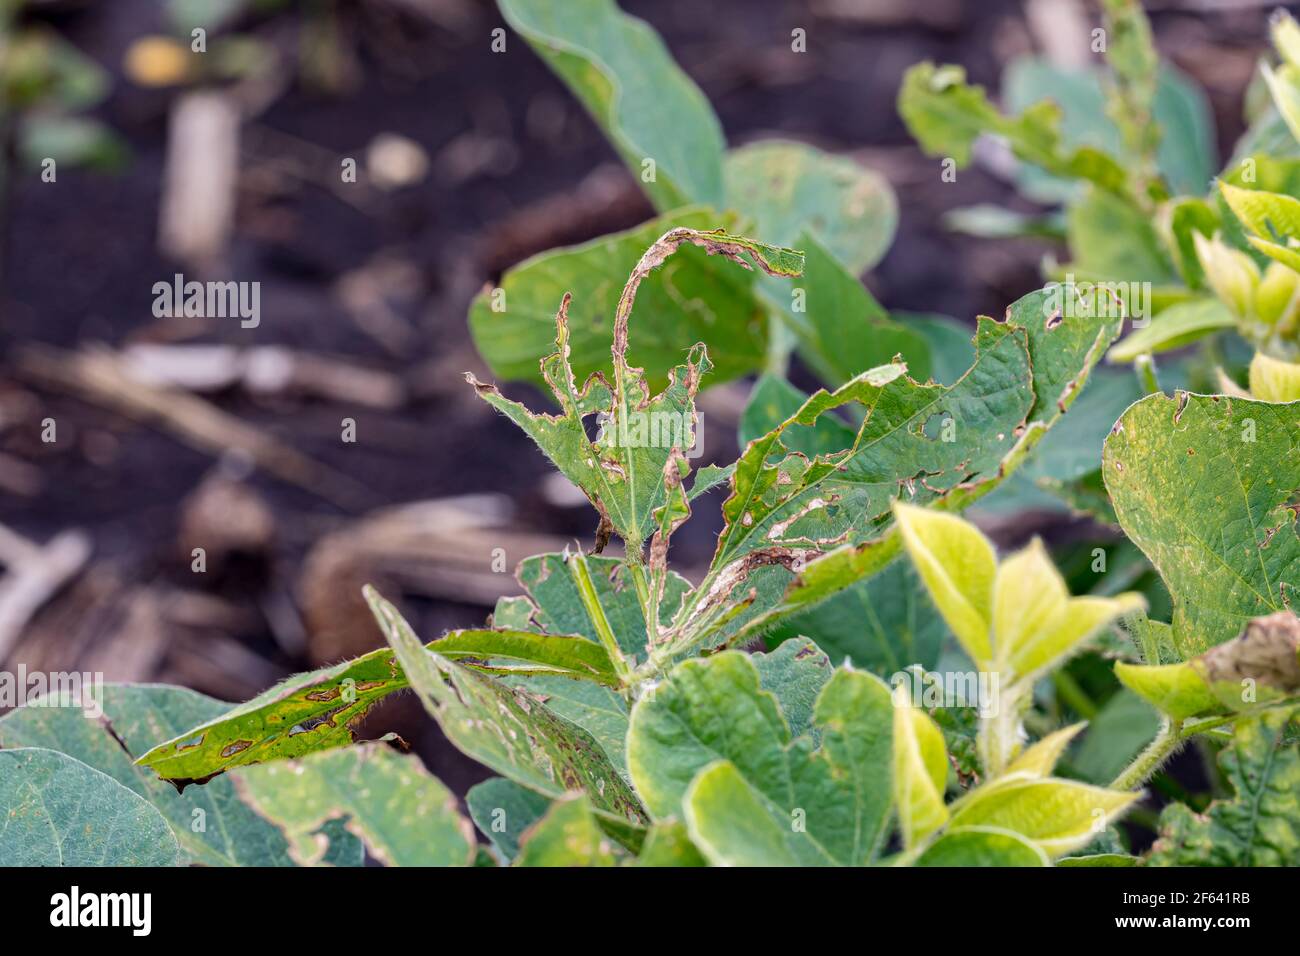 Closeup of soybean plant leaf with chemical herbicide damage. Concept of farming, weed control, yield loss. Stock Photo